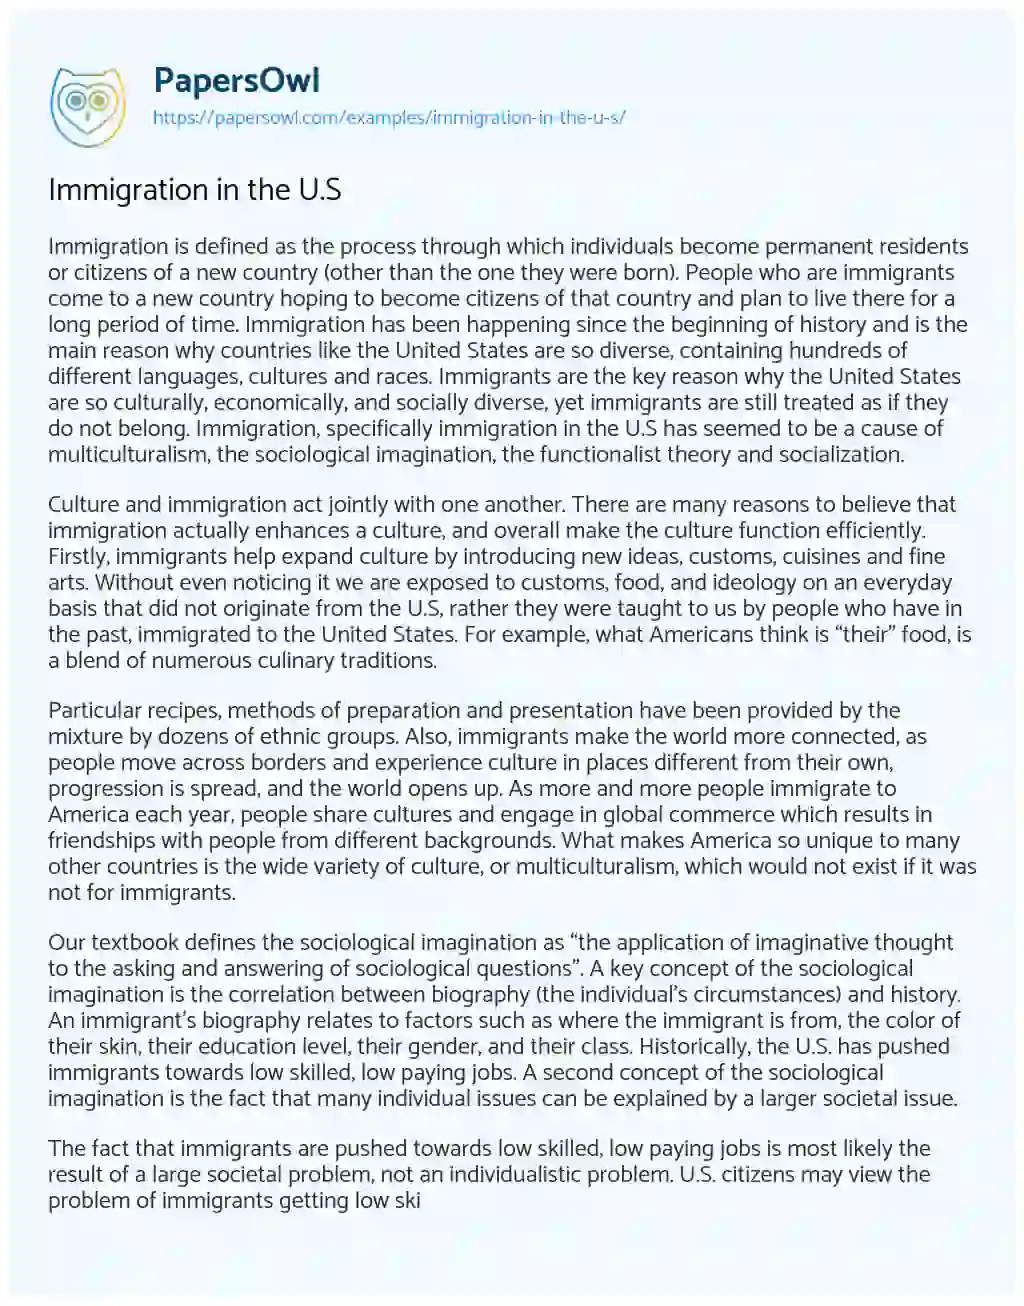 Essay on Immigration in the U.S